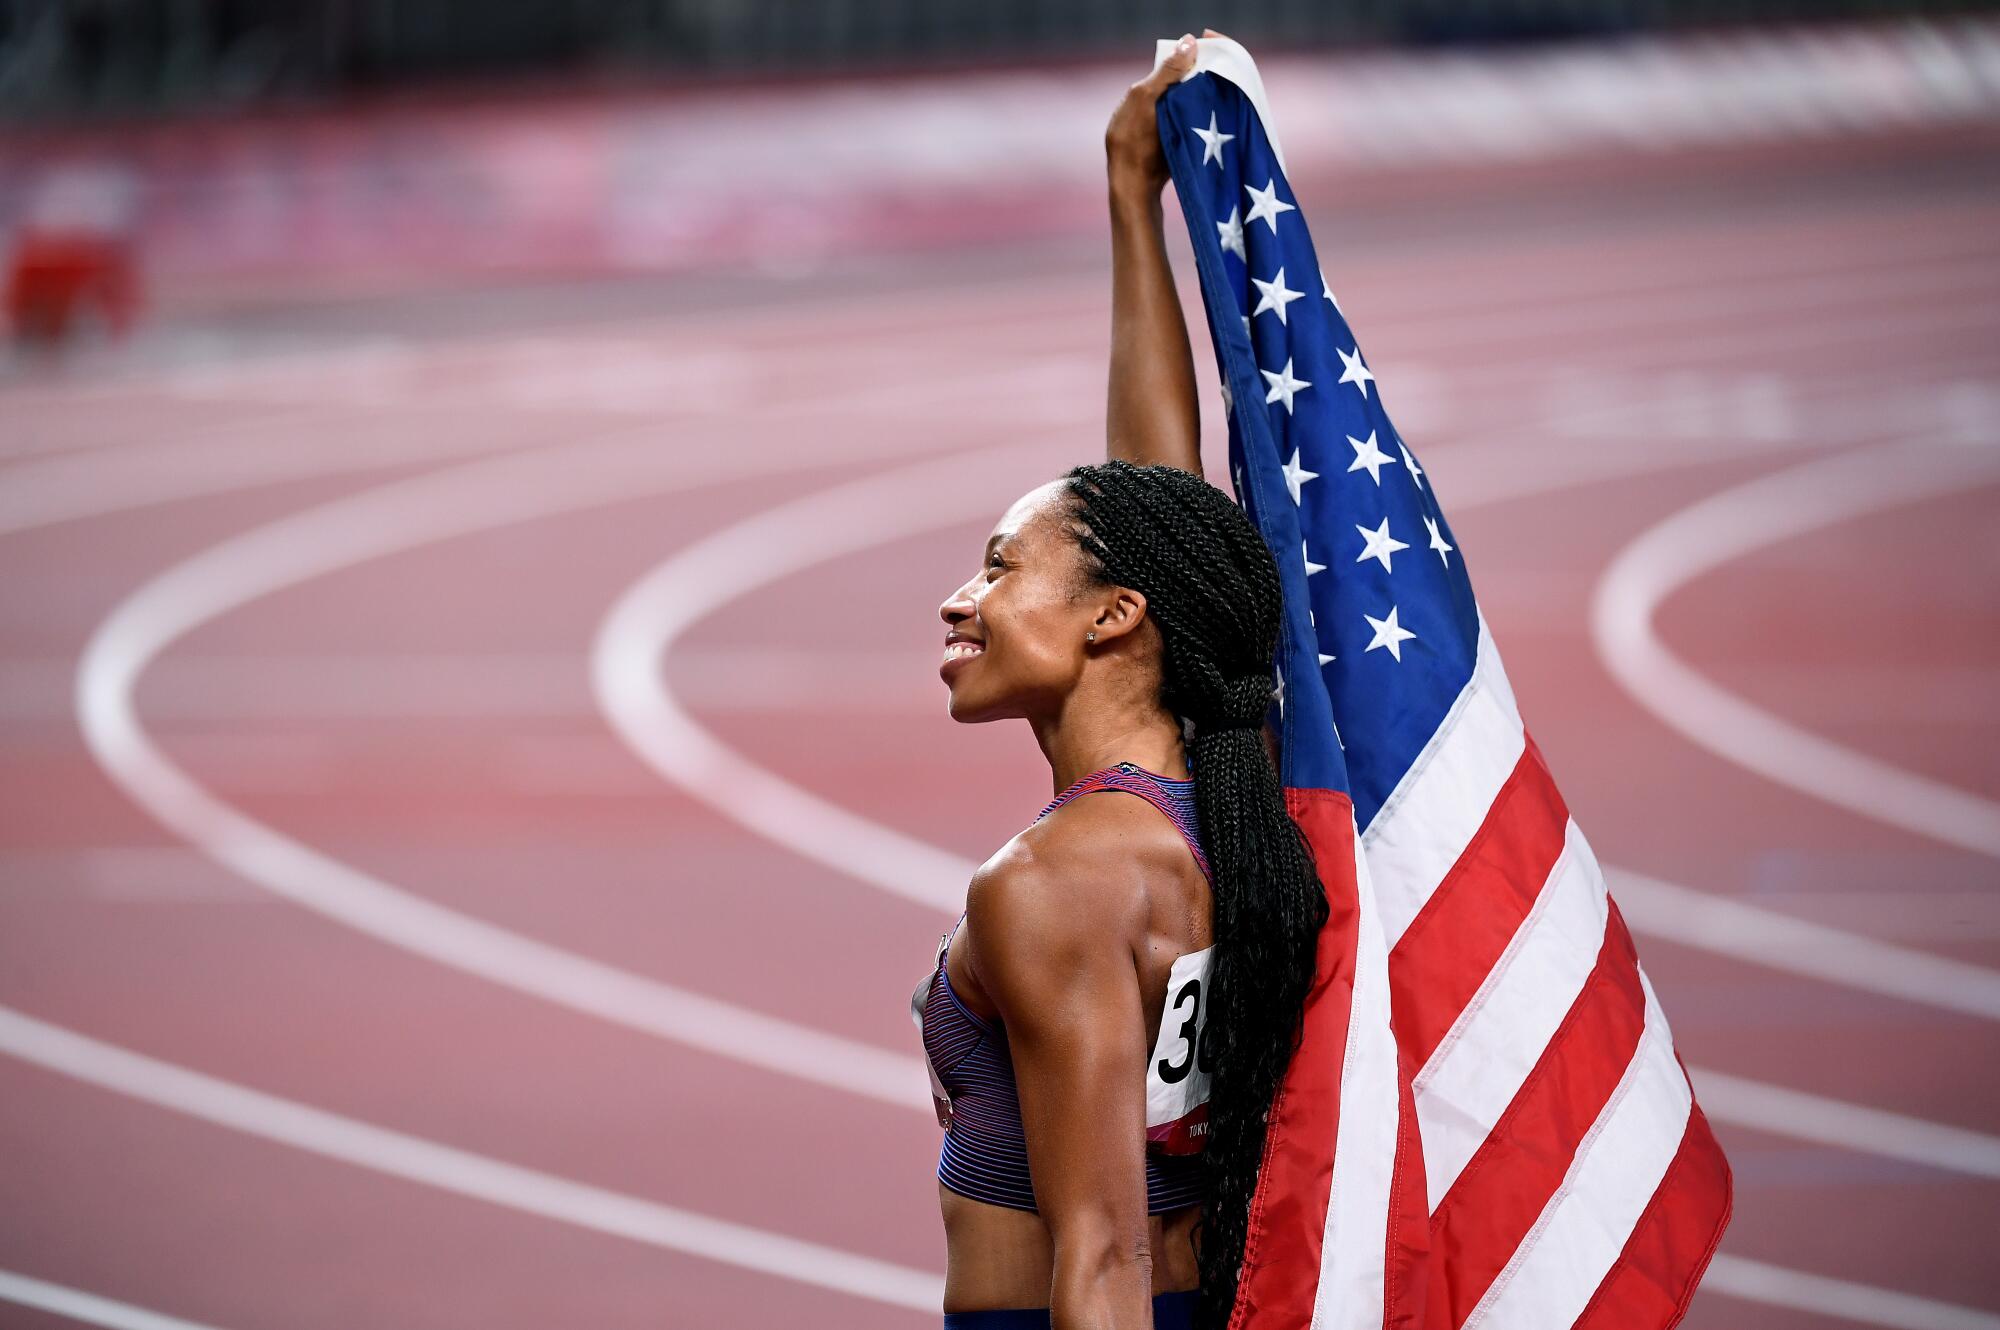 USA's Allyson Felix holds up the American flag